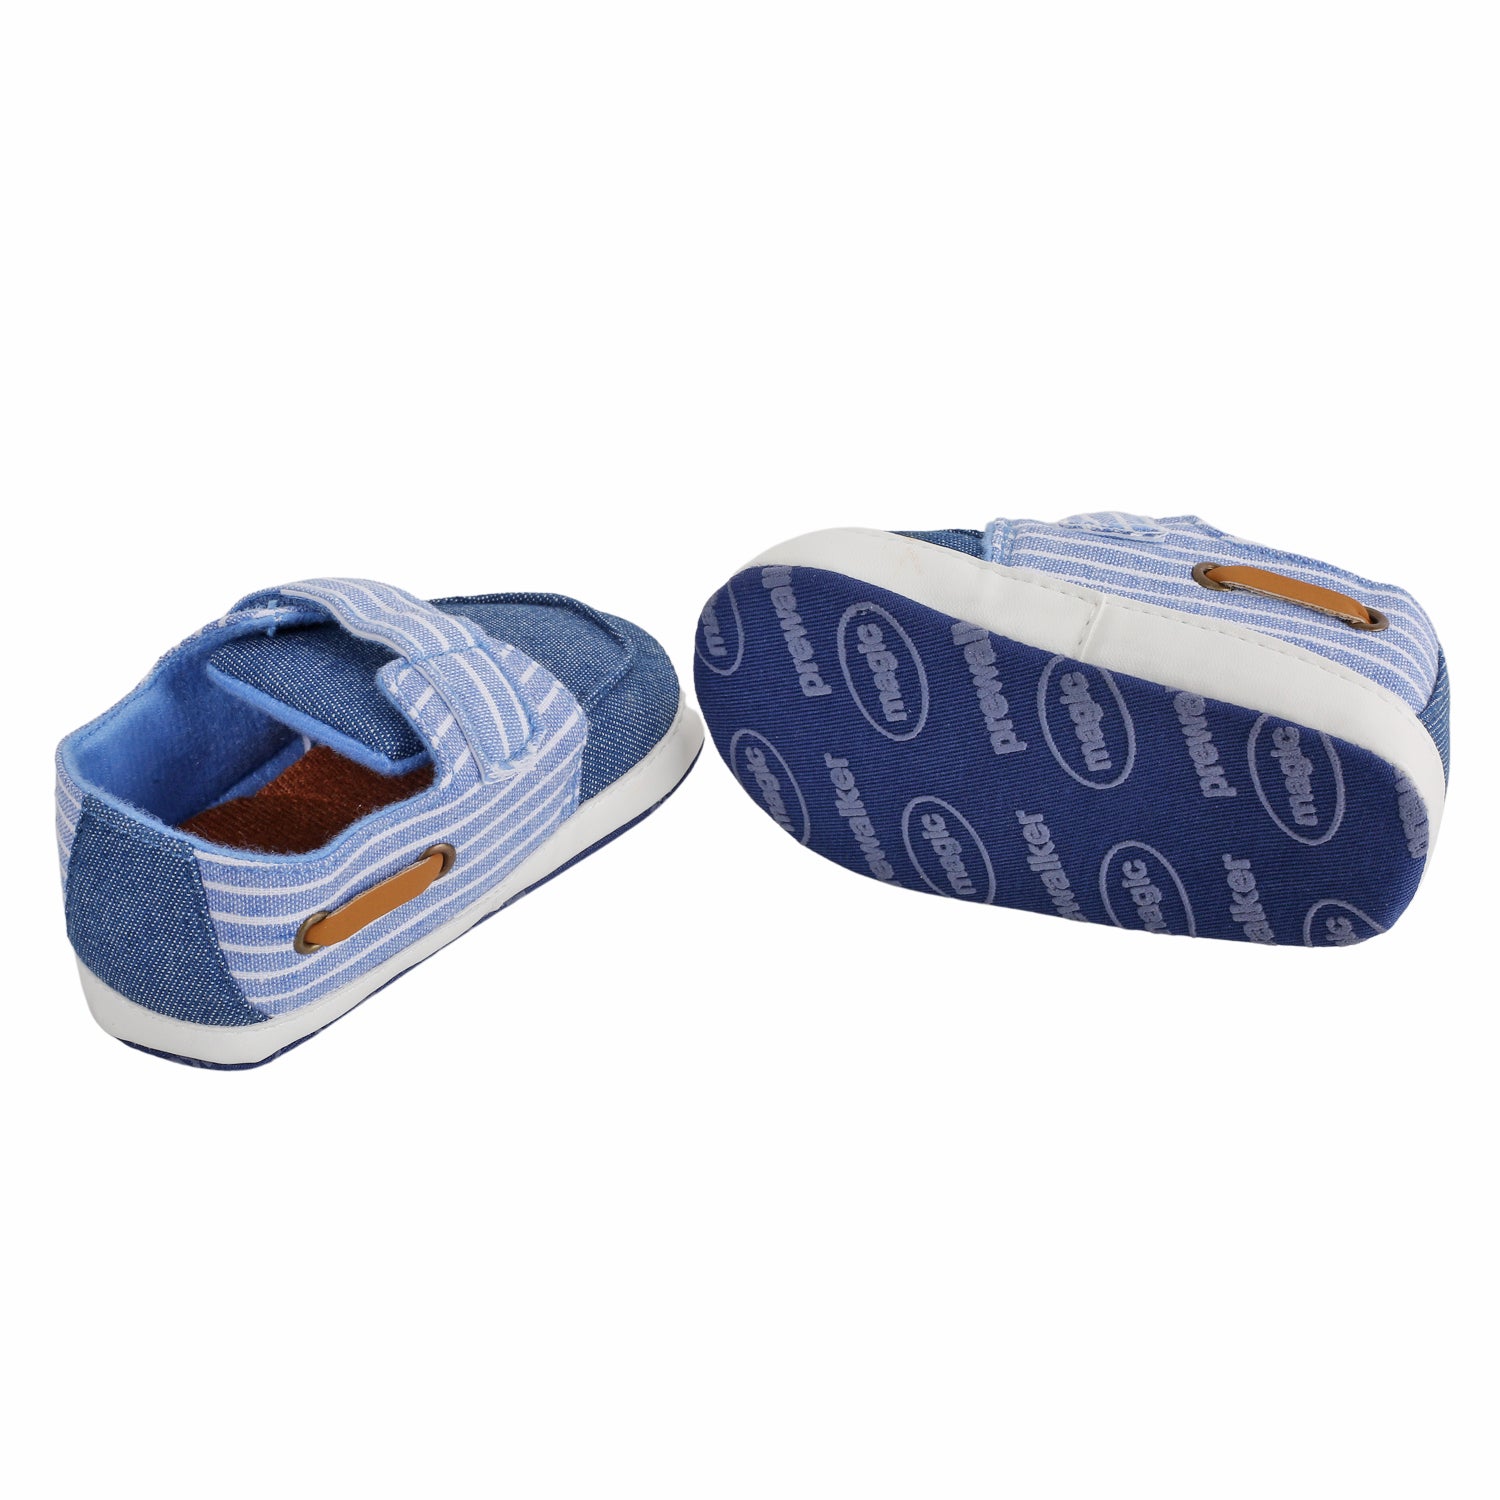 Baby Moo Striped Blue Velcro Booties - Baby Moo